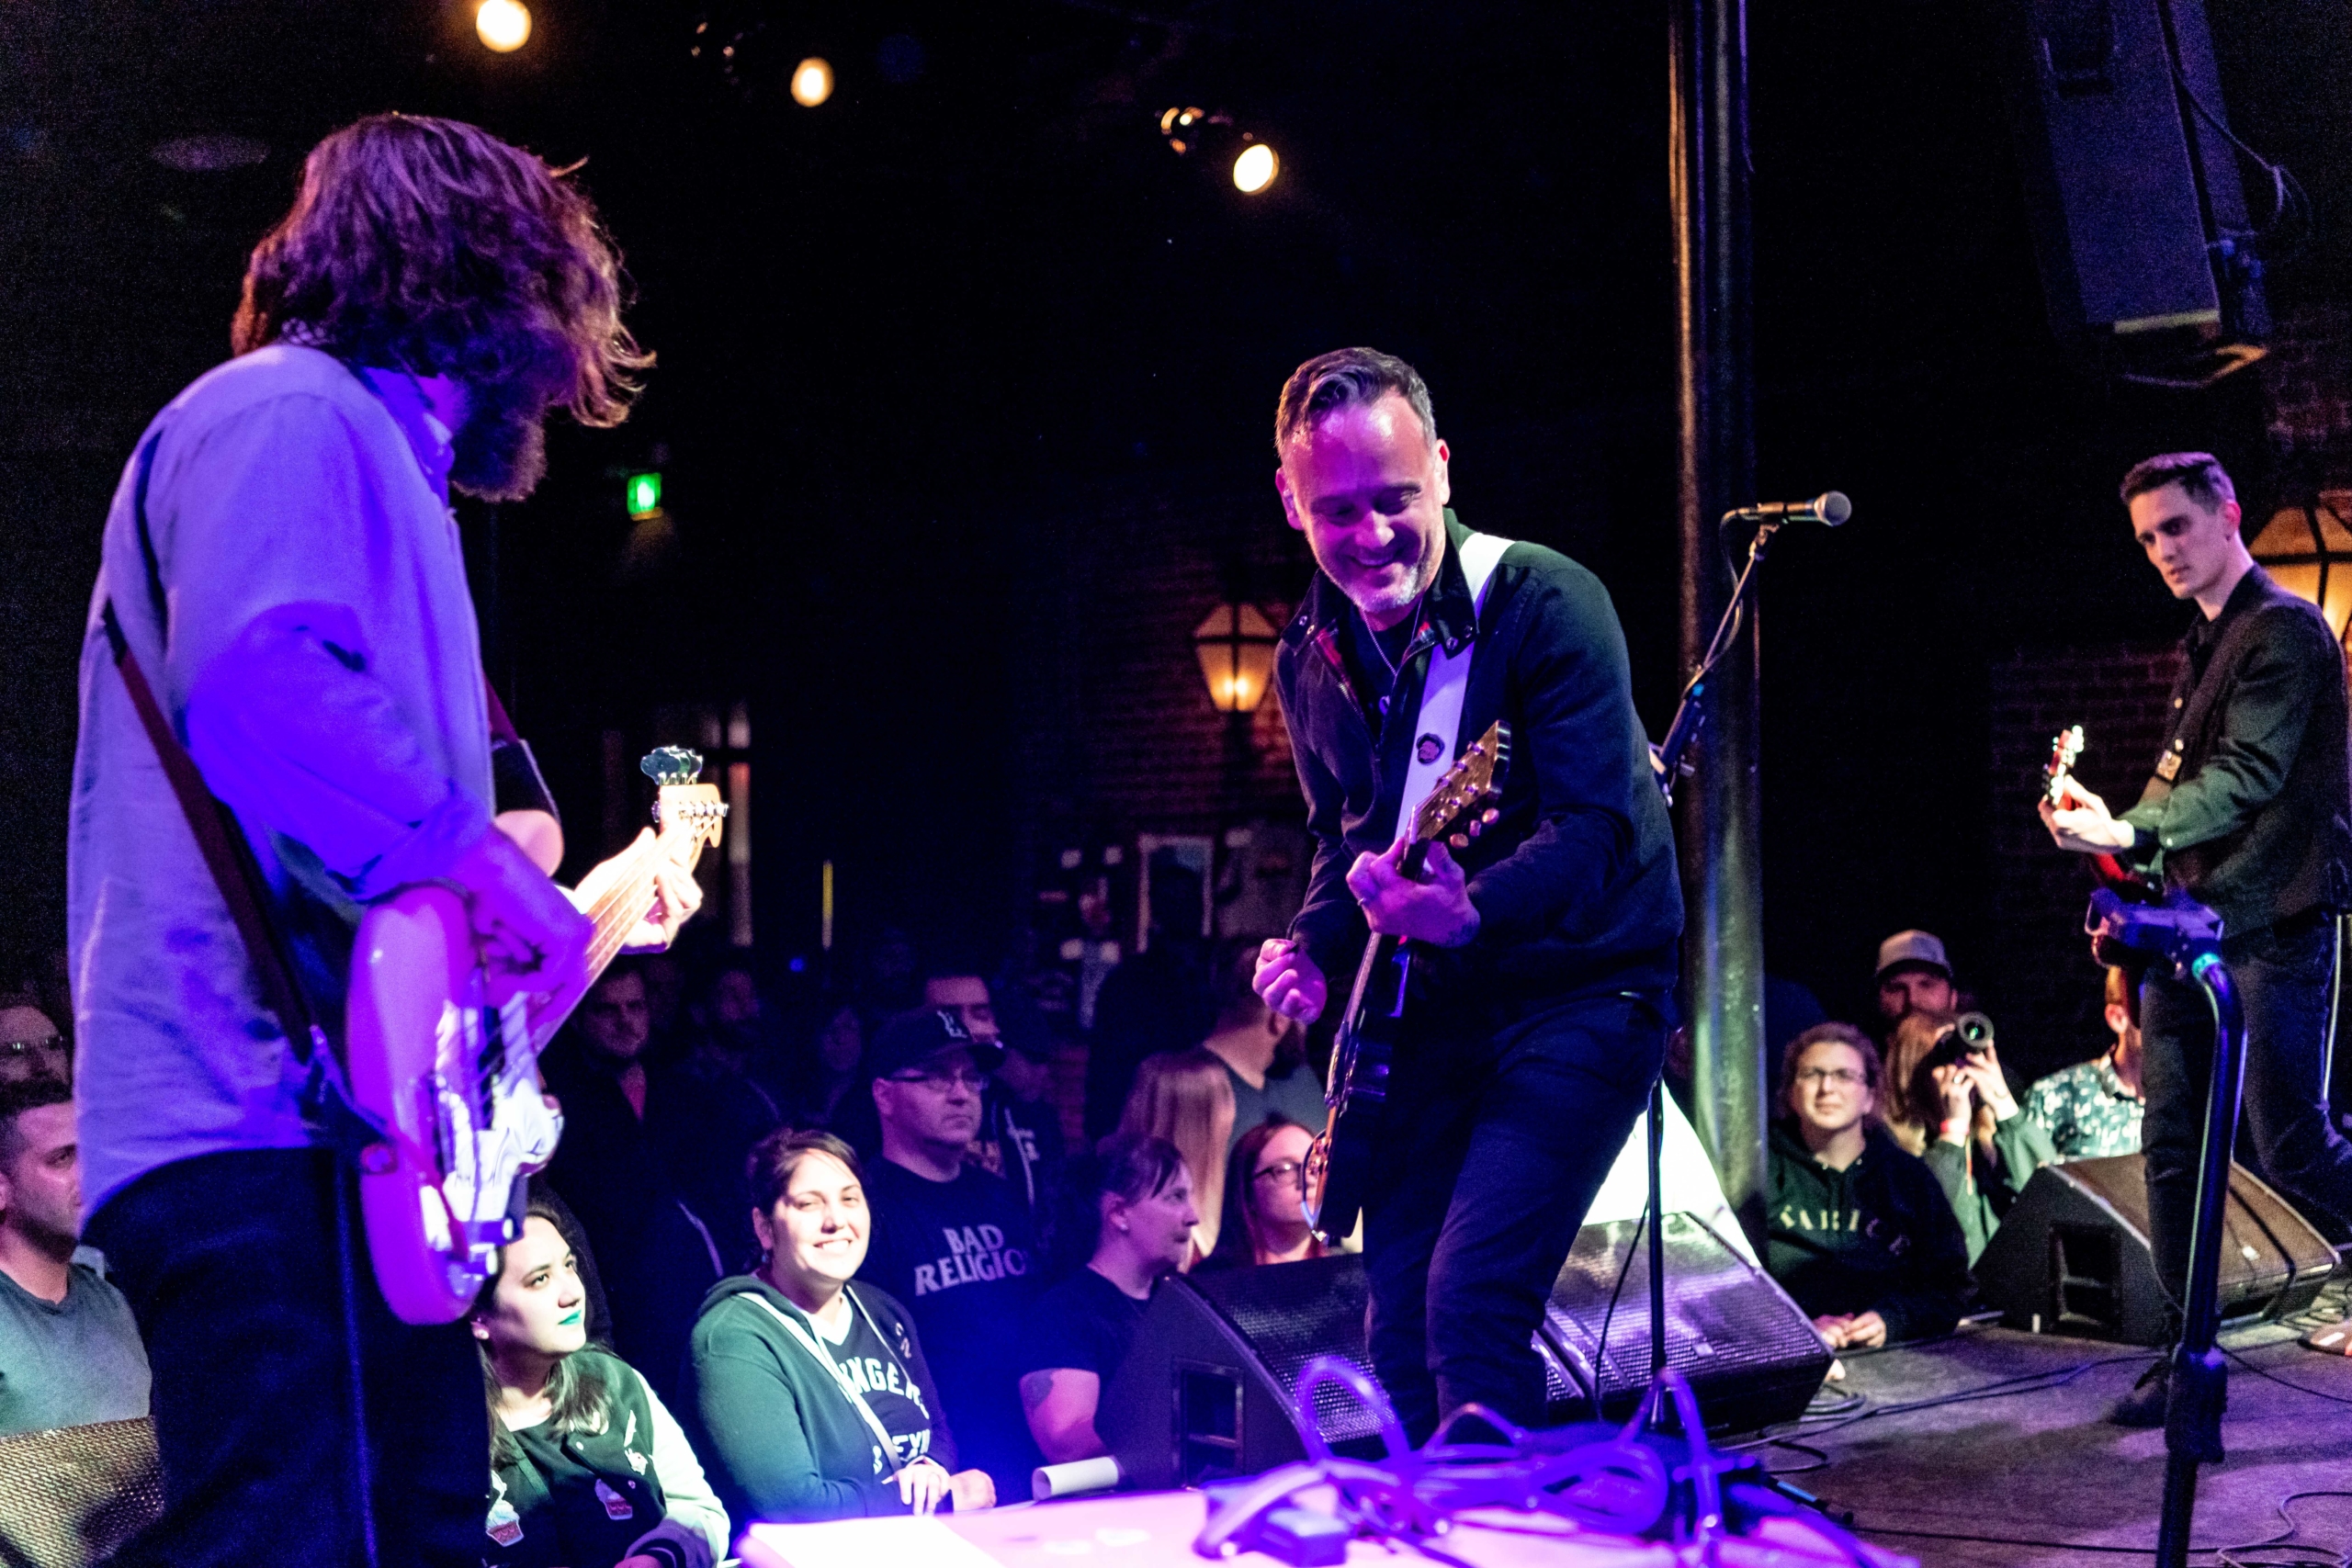 Dave Hause & The Mermaid at Slim’s in San Francisco